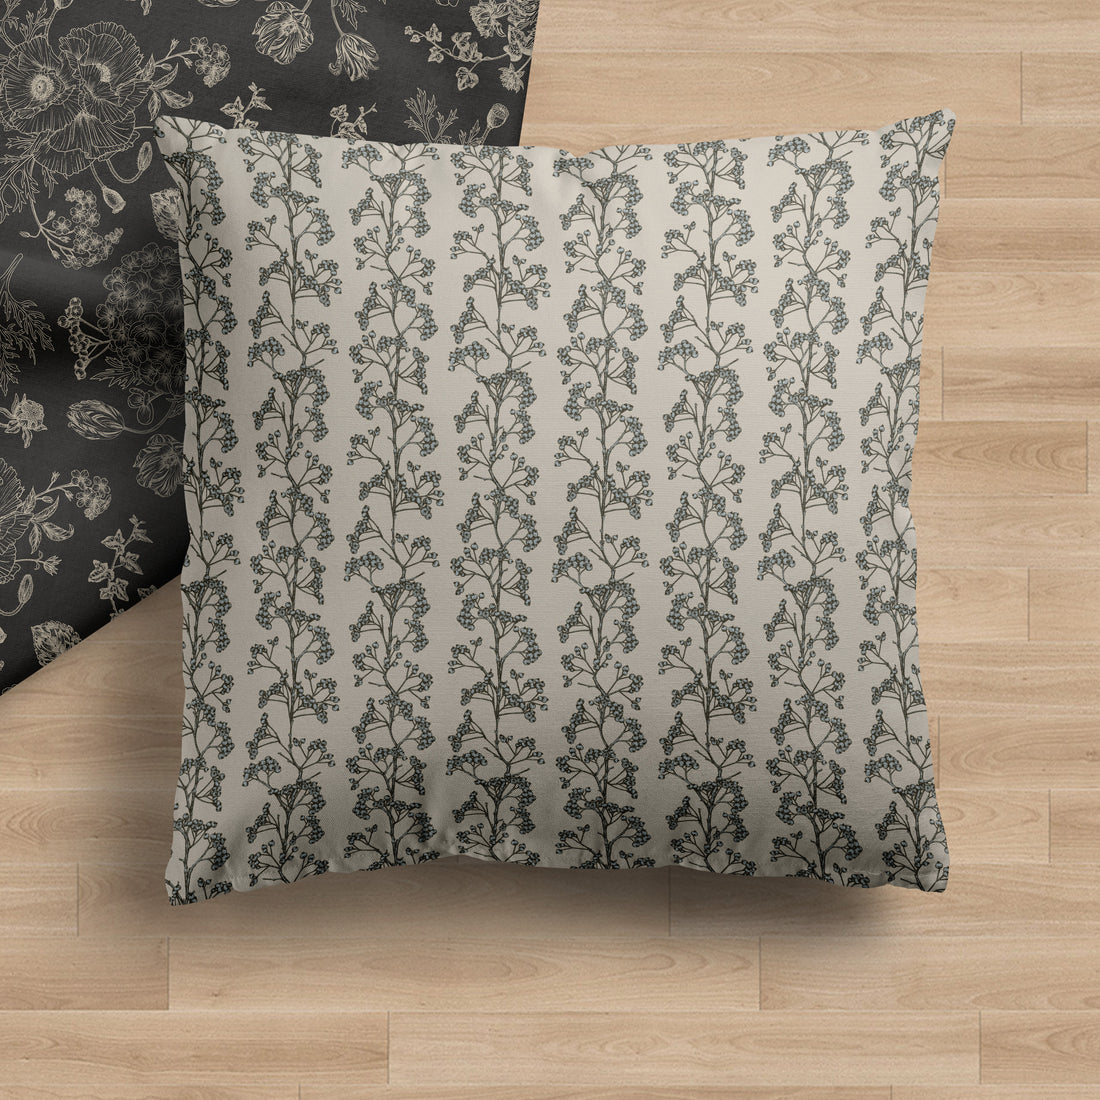 Beige Floral Blueberry Vines Pillow Cover